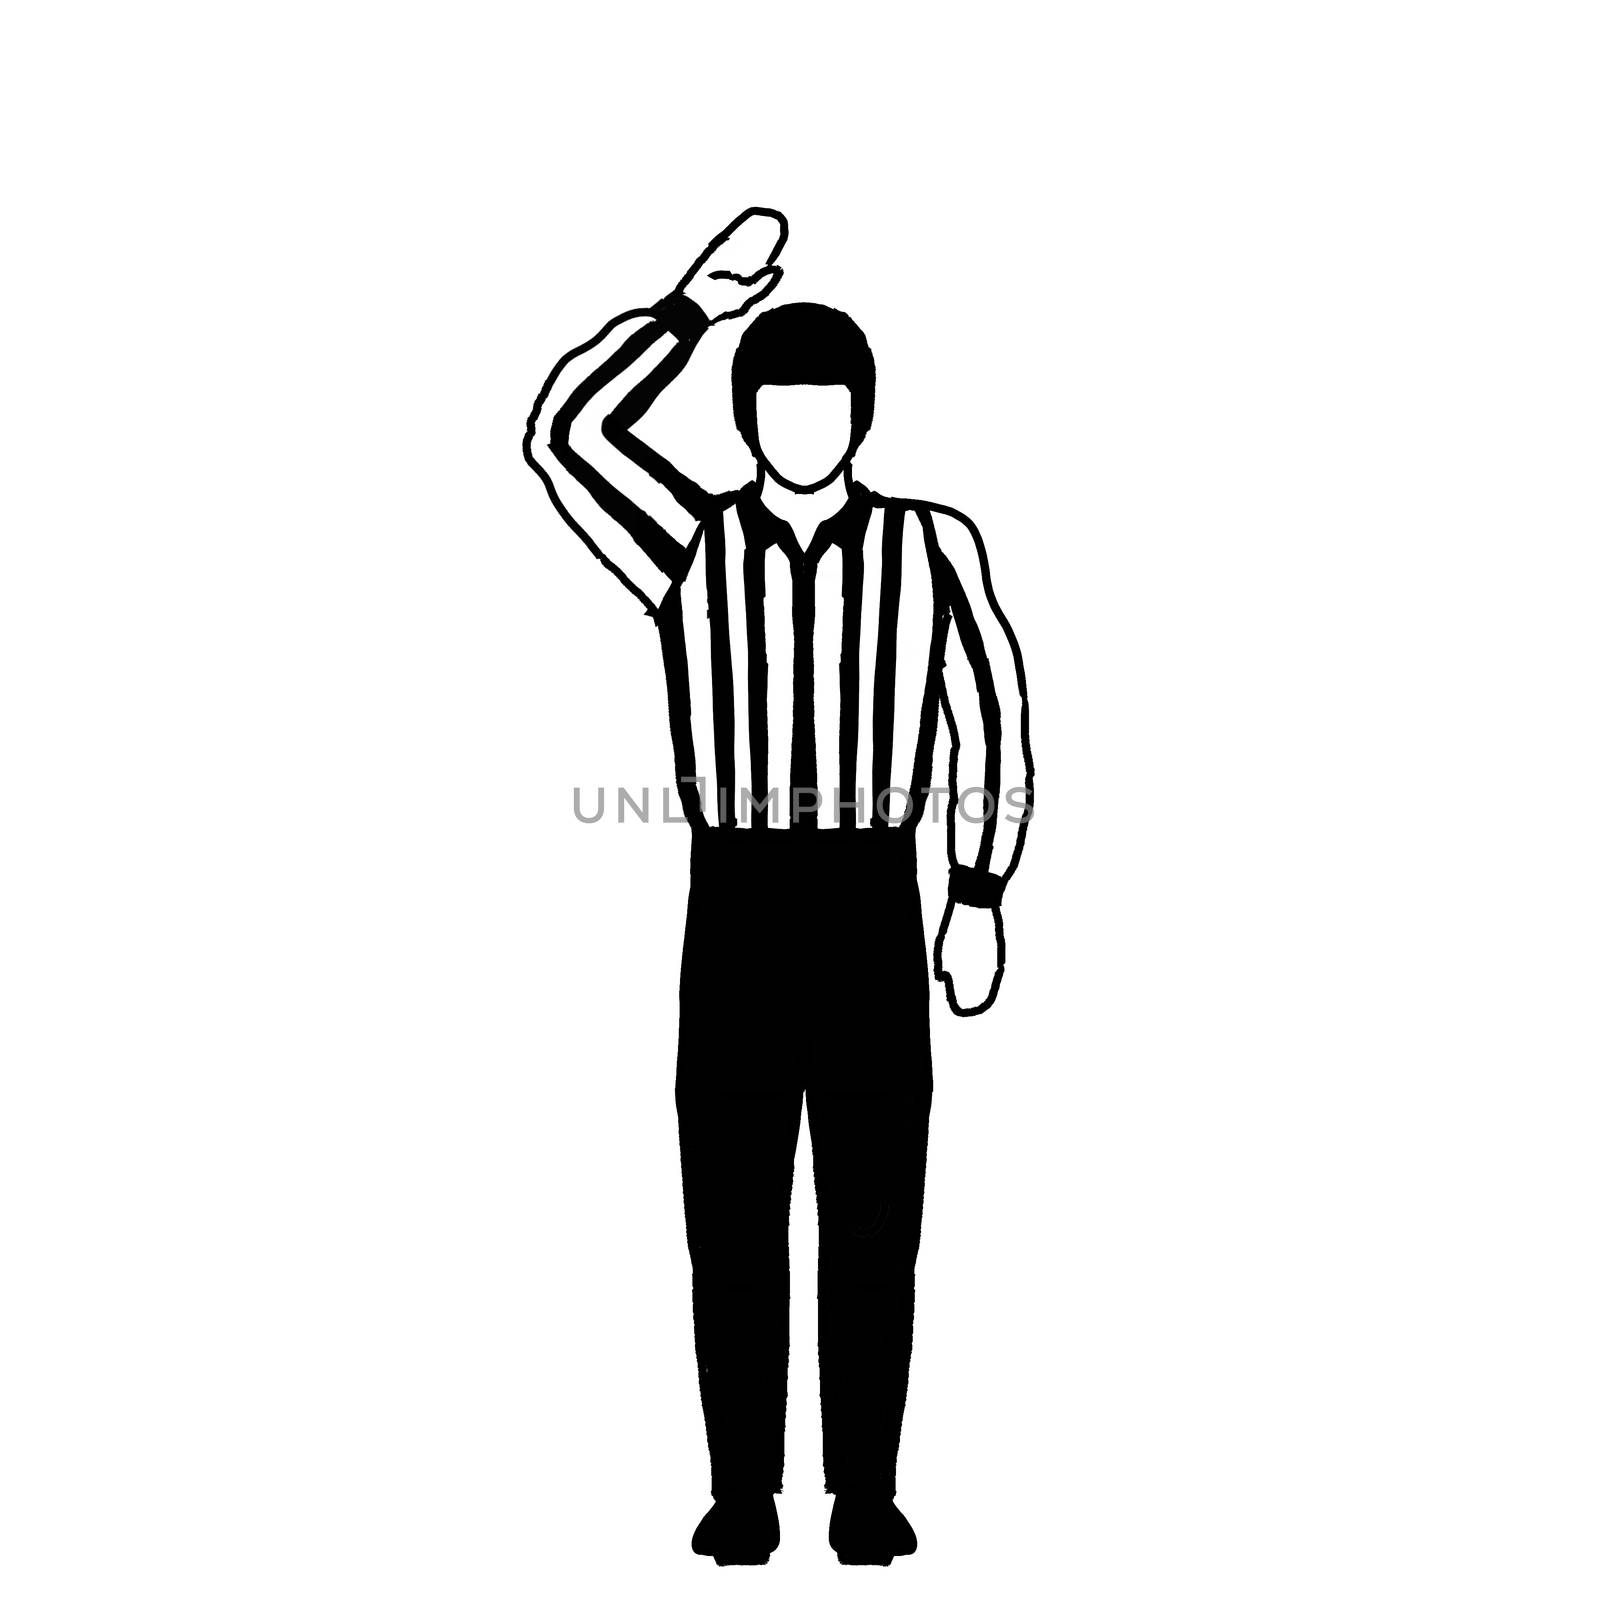 Ice Hockey Official or Referee Hand Signal Drawing Black and White by patrimonio